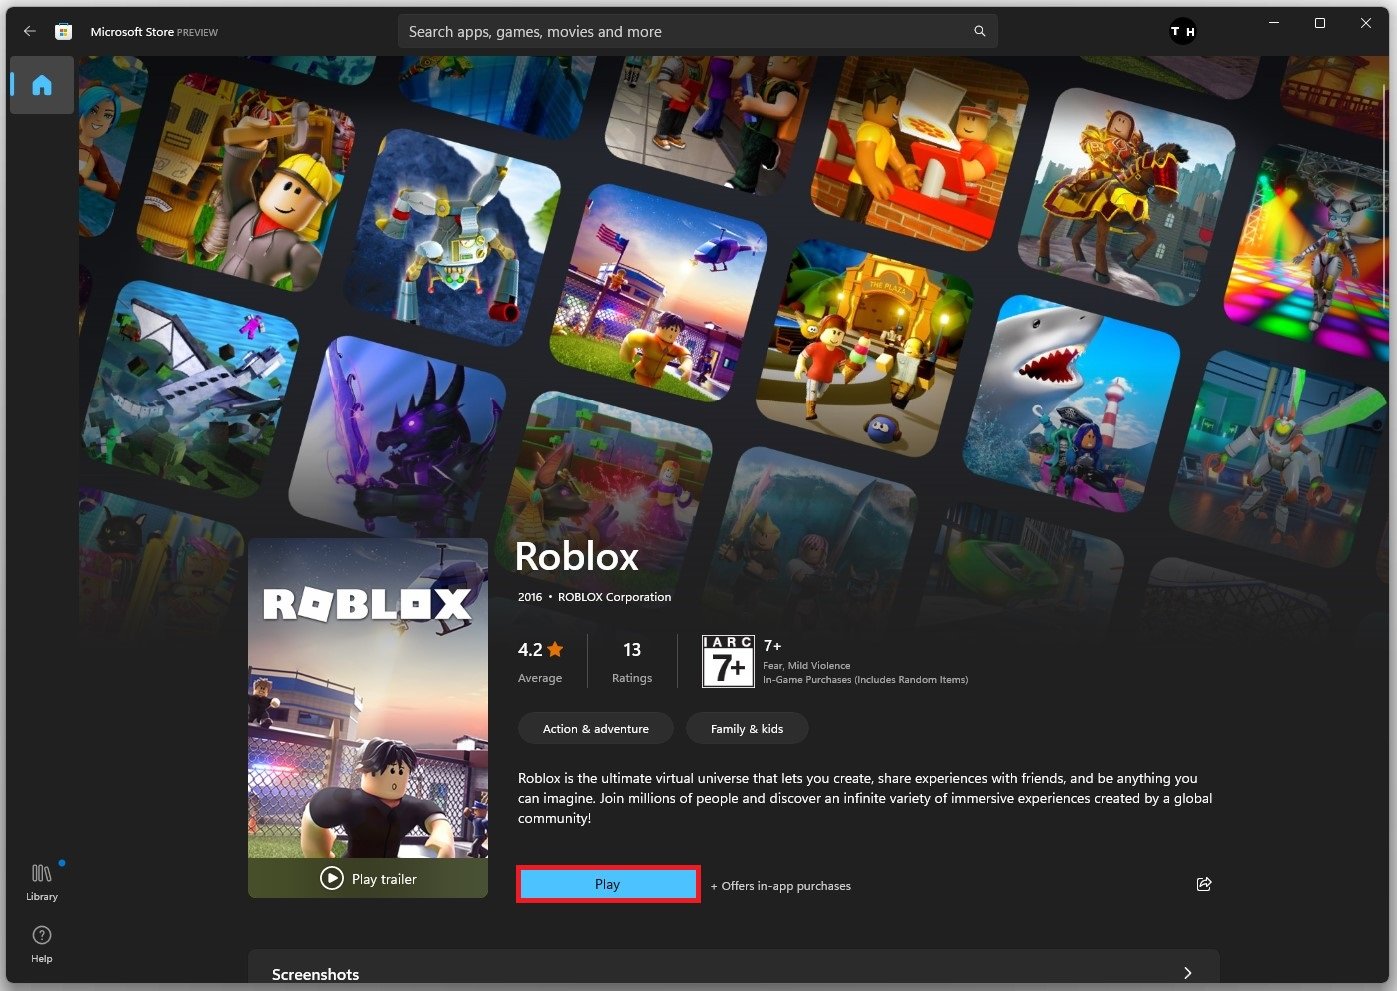 How to Download Roblox Studio on Laptop & PC - Install Roblox Studio on  Windows Computer : r/GaugingGadgets